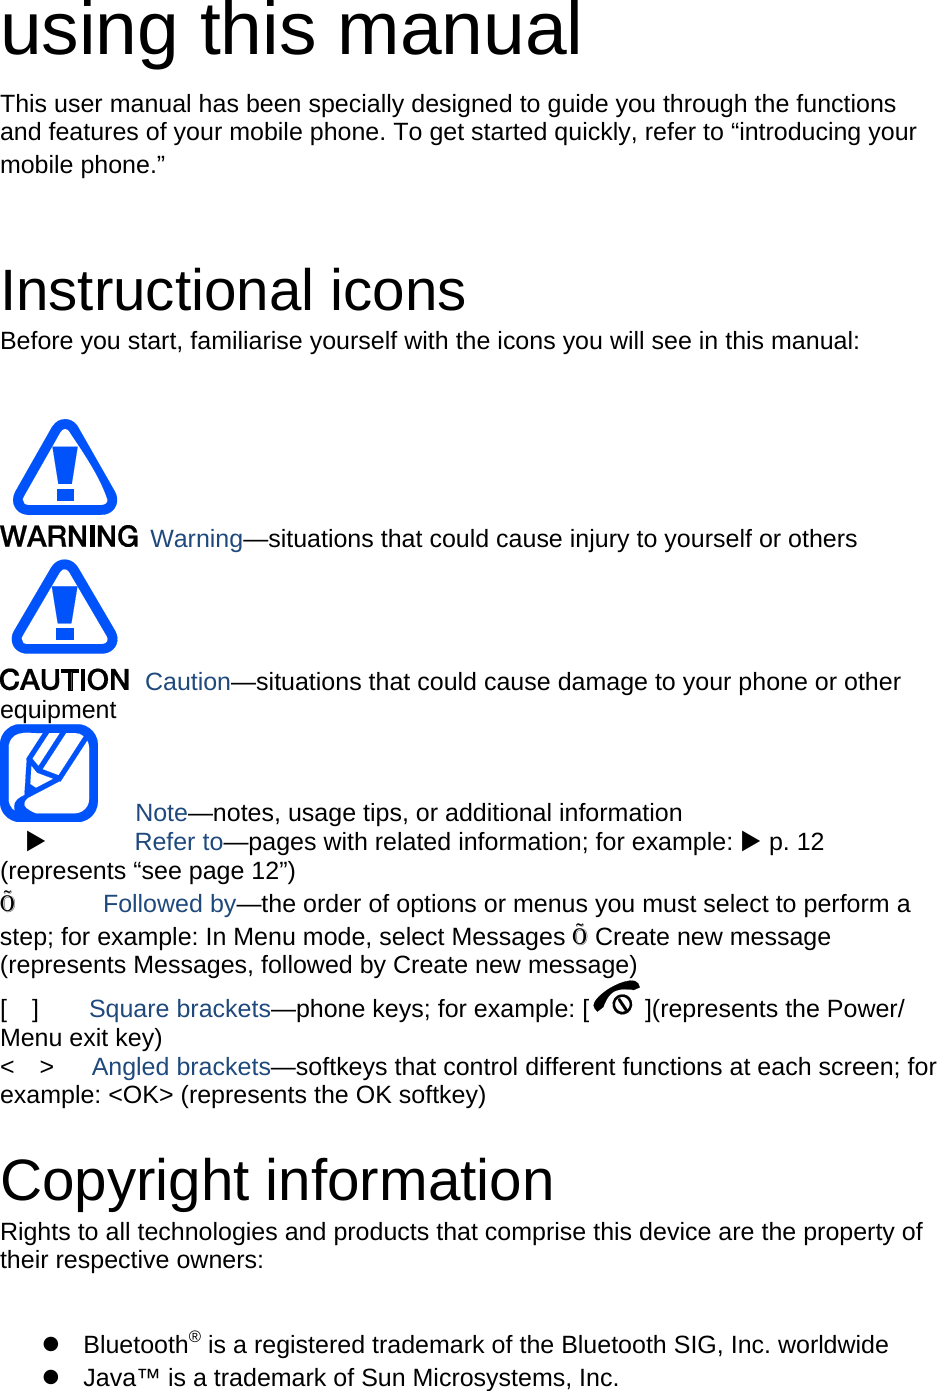 using this manual This user manual has been specially designed to guide you through the functions and features of your mobile phone. To get started quickly, refer to “introducing your mobile phone.”   Instructional icons Before you start, familiarise yourself with the icons you will see in this manual:     Warning—situations that could cause injury to yourself or others  Caution—situations that could cause damage to your phone or other equipment    Note—notes, usage tips, or additional information   X       Refer to—pages with related information; for example: X p. 12 (represents “see page 12”) Õ       Followed by—the order of options or menus you must select to perform a step; for example: In Menu mode, select Messages Õ Create new message (represents Messages, followed by Create new message) [  ]    Square brackets—phone keys; for example: [ ](represents the Power/ Menu exit key) &lt;  &gt;   Angled brackets—softkeys that control different functions at each screen; for example: &lt;OK&gt; (represents the OK softkey)  Copyright information Rights to all technologies and products that comprise this device are the property of their respective owners:  z Bluetooth® is a registered trademark of the Bluetooth SIG, Inc. worldwide z  Java™ is a trademark of Sun Microsystems, Inc. 